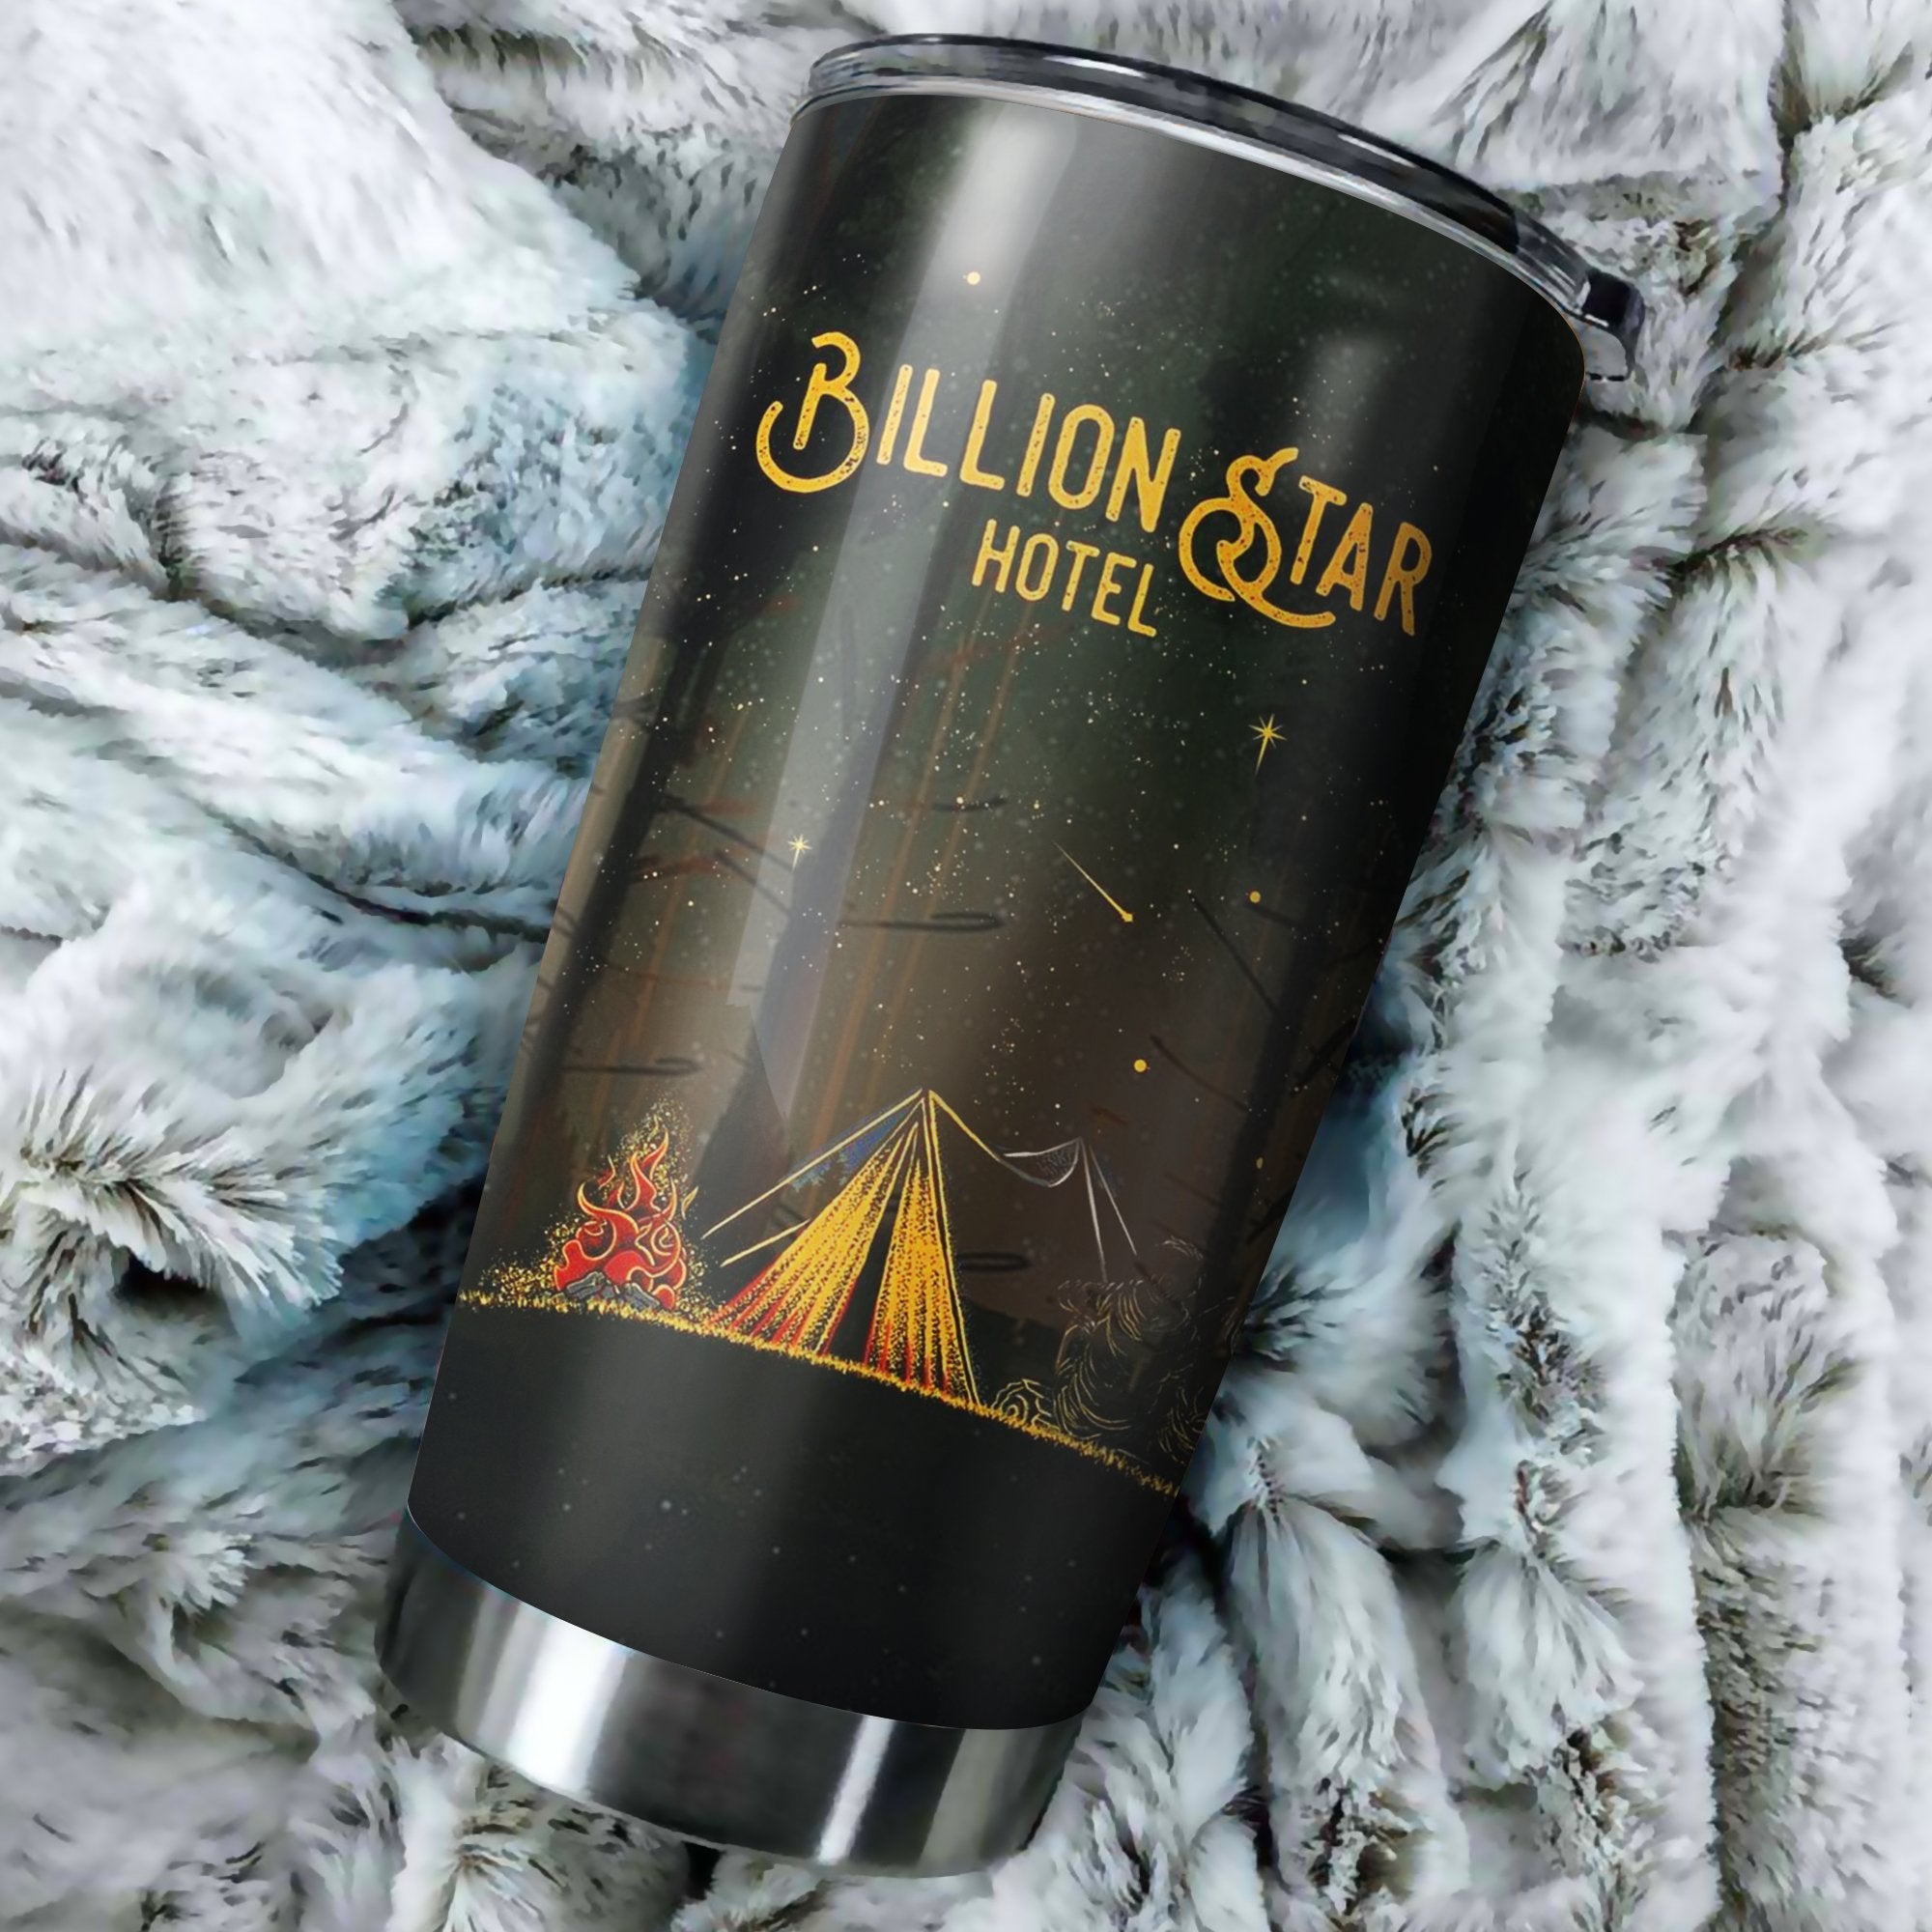 Camping Because Therapy Is Expensive Camping Camfire Tumbler 2023 Nearkii